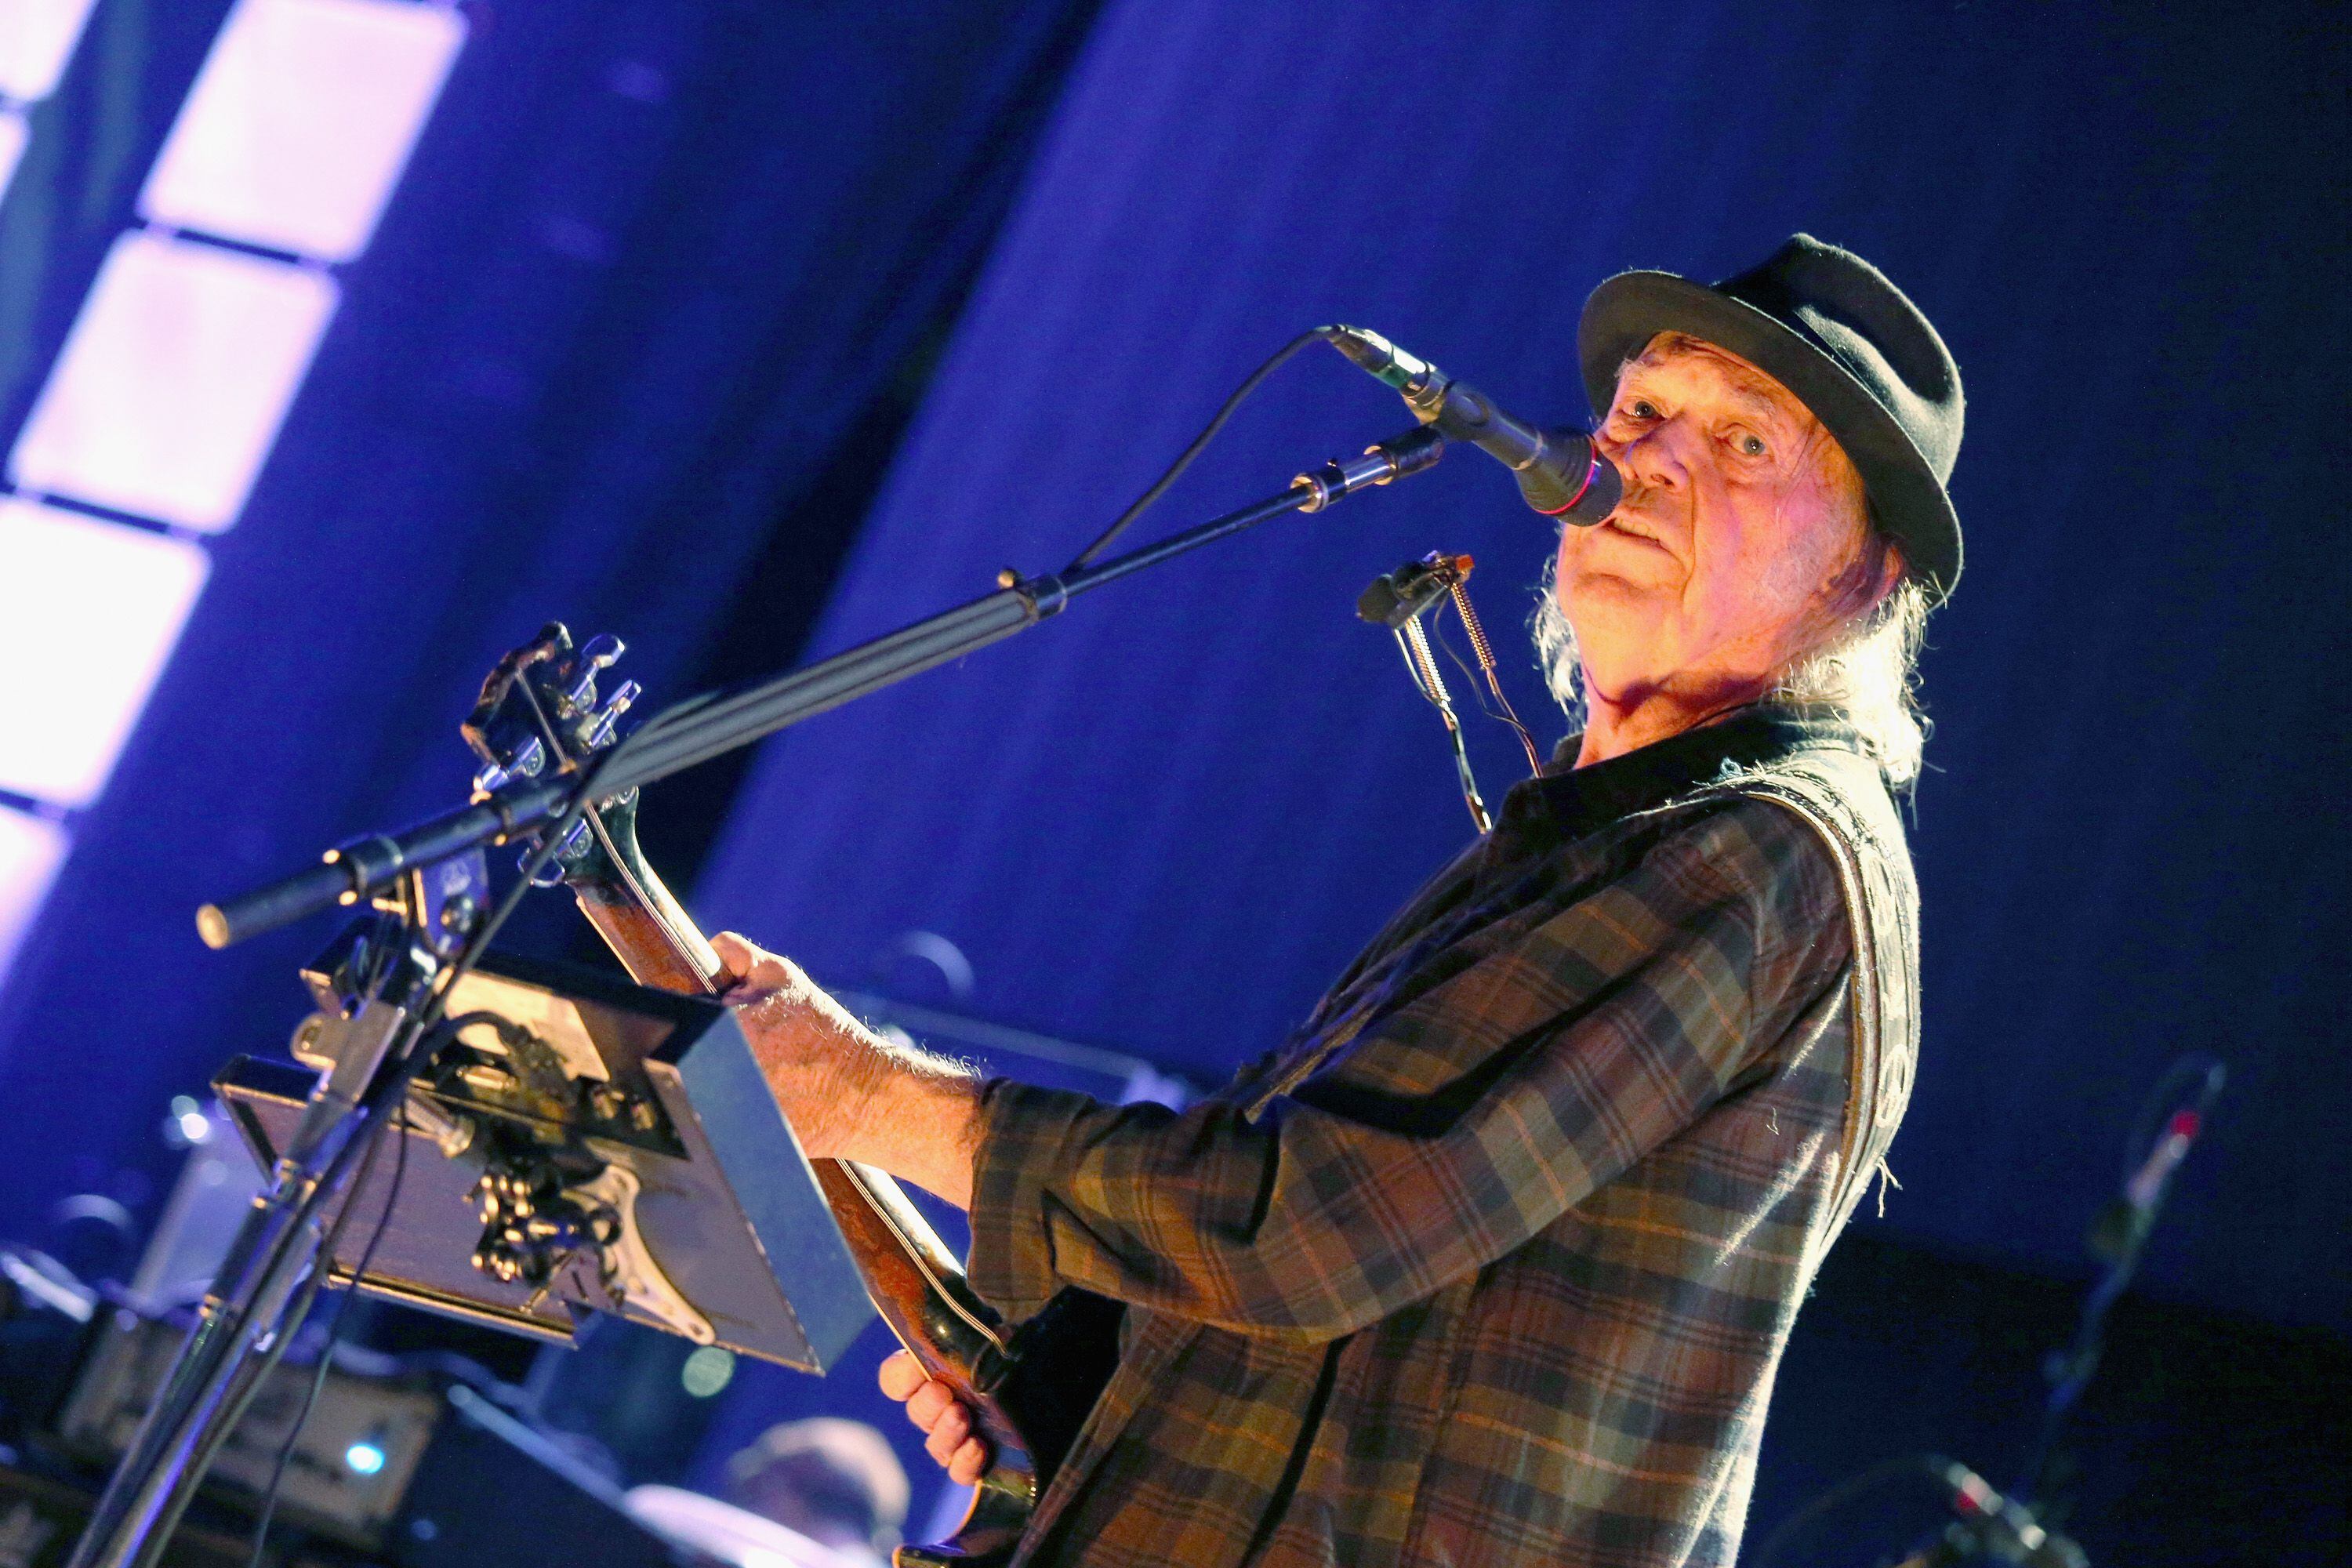 Neil Young at the 34th Farm Aid Festival in September 2019 in Wisconsin.